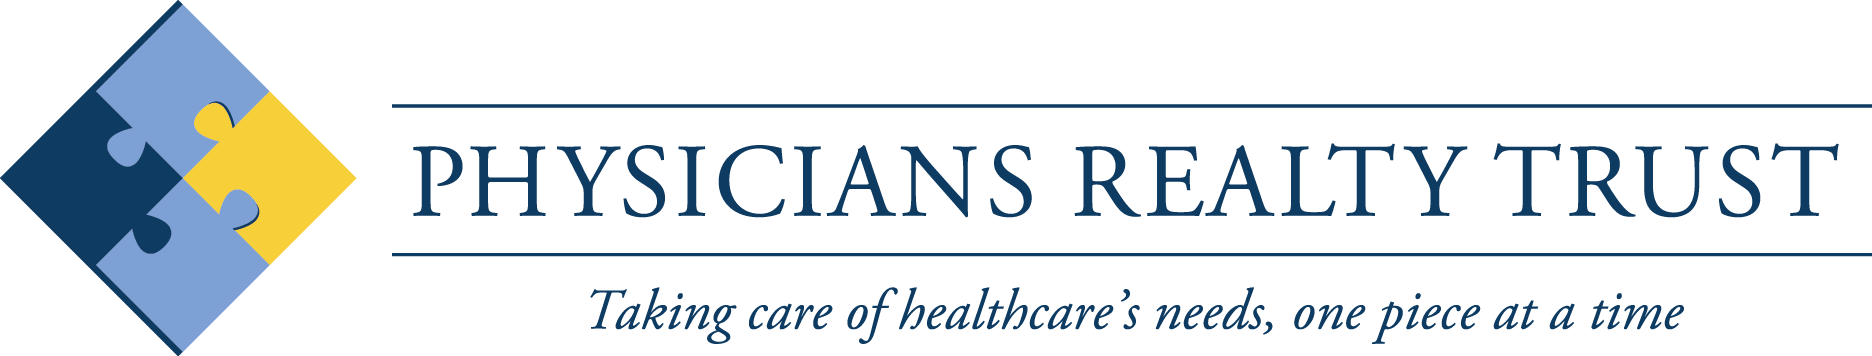 Physician's Realty Trust